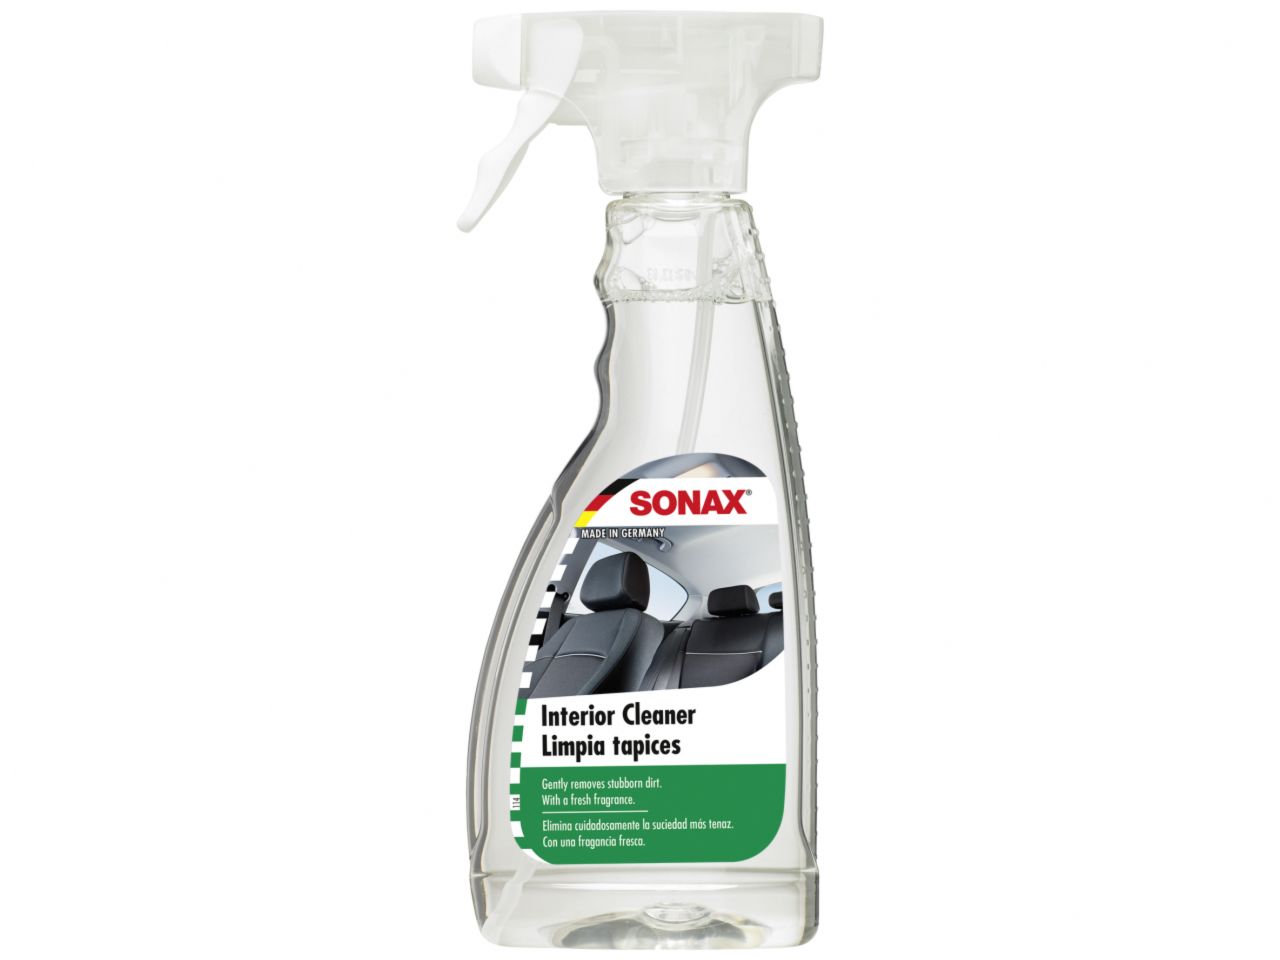 Sonax Cleaners 321200 Item Image